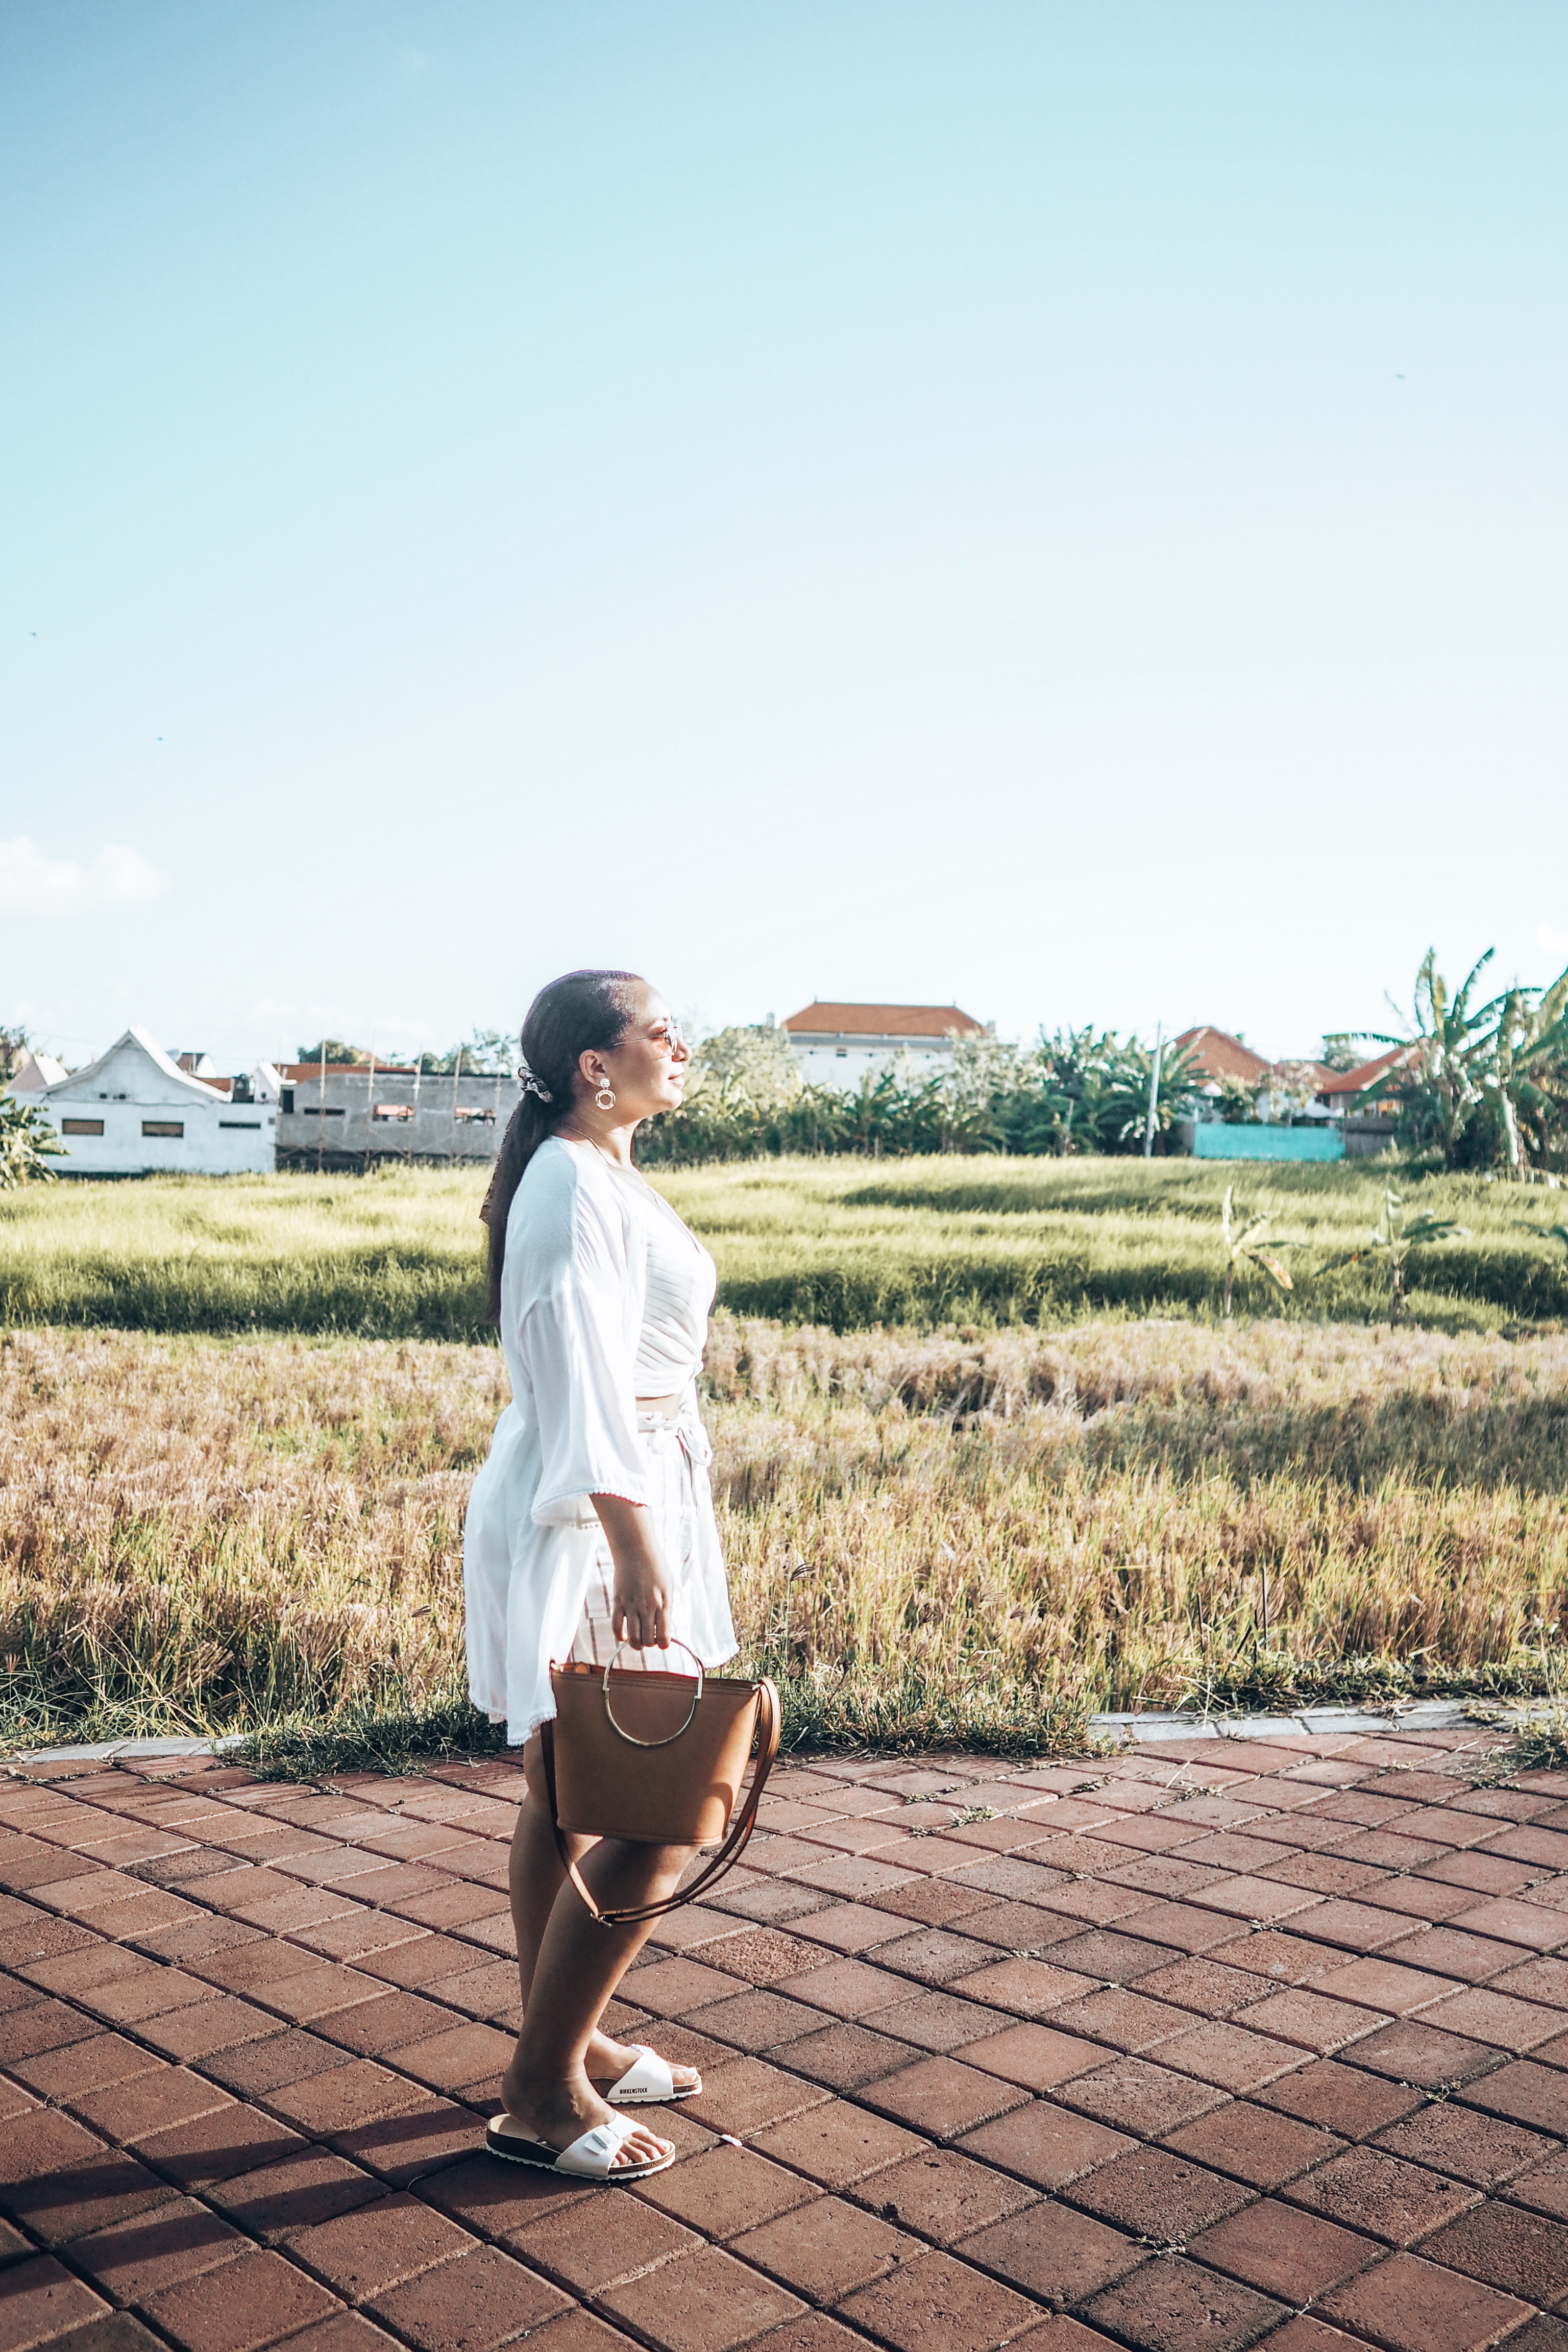 Our Bali Honeymoon: A Travel Guide. Where to eat, stay and what to do in Canggu, Nusa Penida, Gili Air and Ubud | SimplyCantara.com